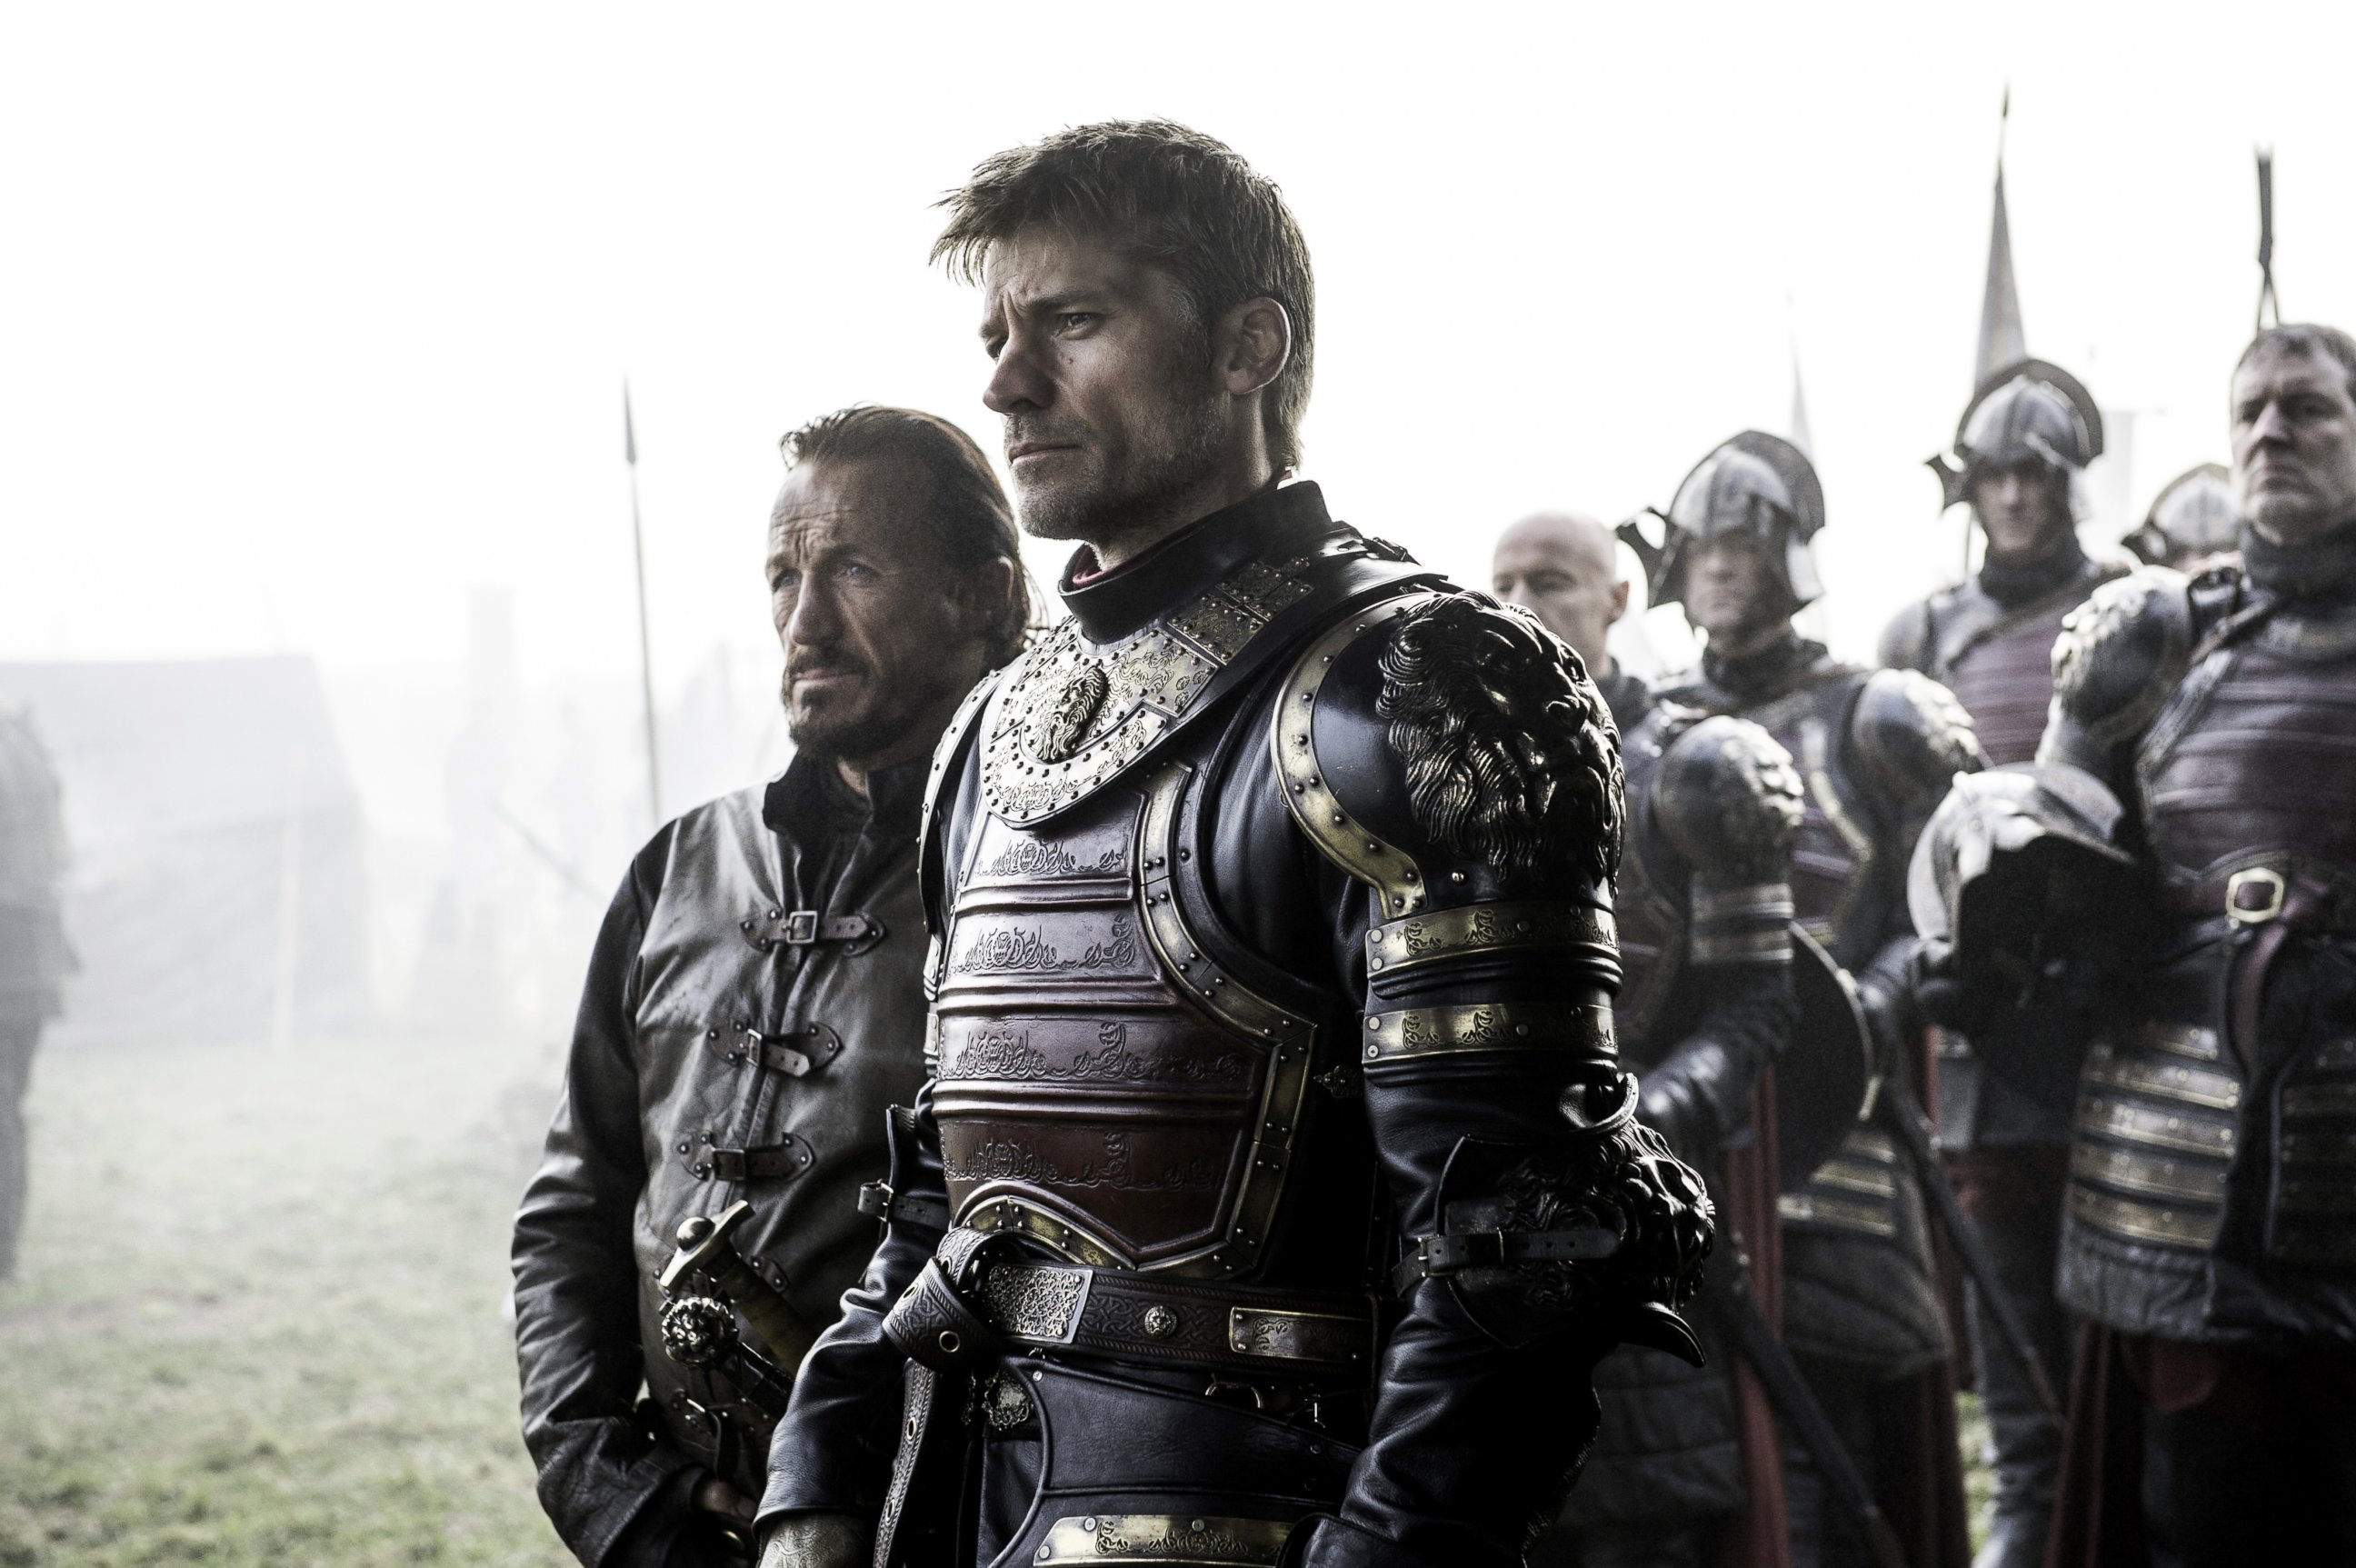 PHOTO: Nikolaj Coster-Waldau portrays the character Jaime Lannister in "Game of Thrones."